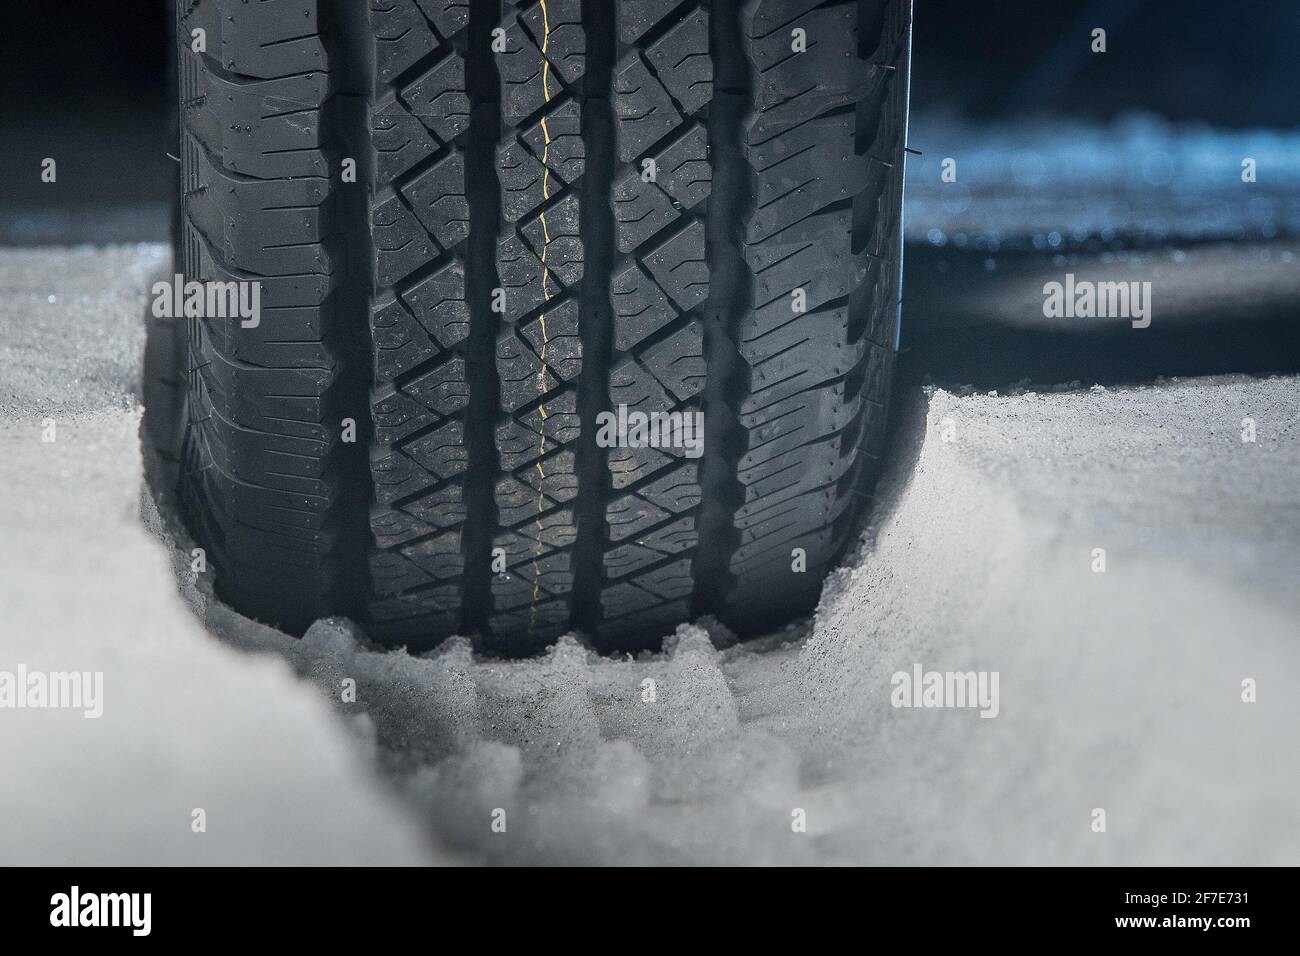 All terrain tire in snow. Snow track visible in snow with a rubber car or SUV tire in front. Tread marks in snow. Winter road safety concept. Stock Photo